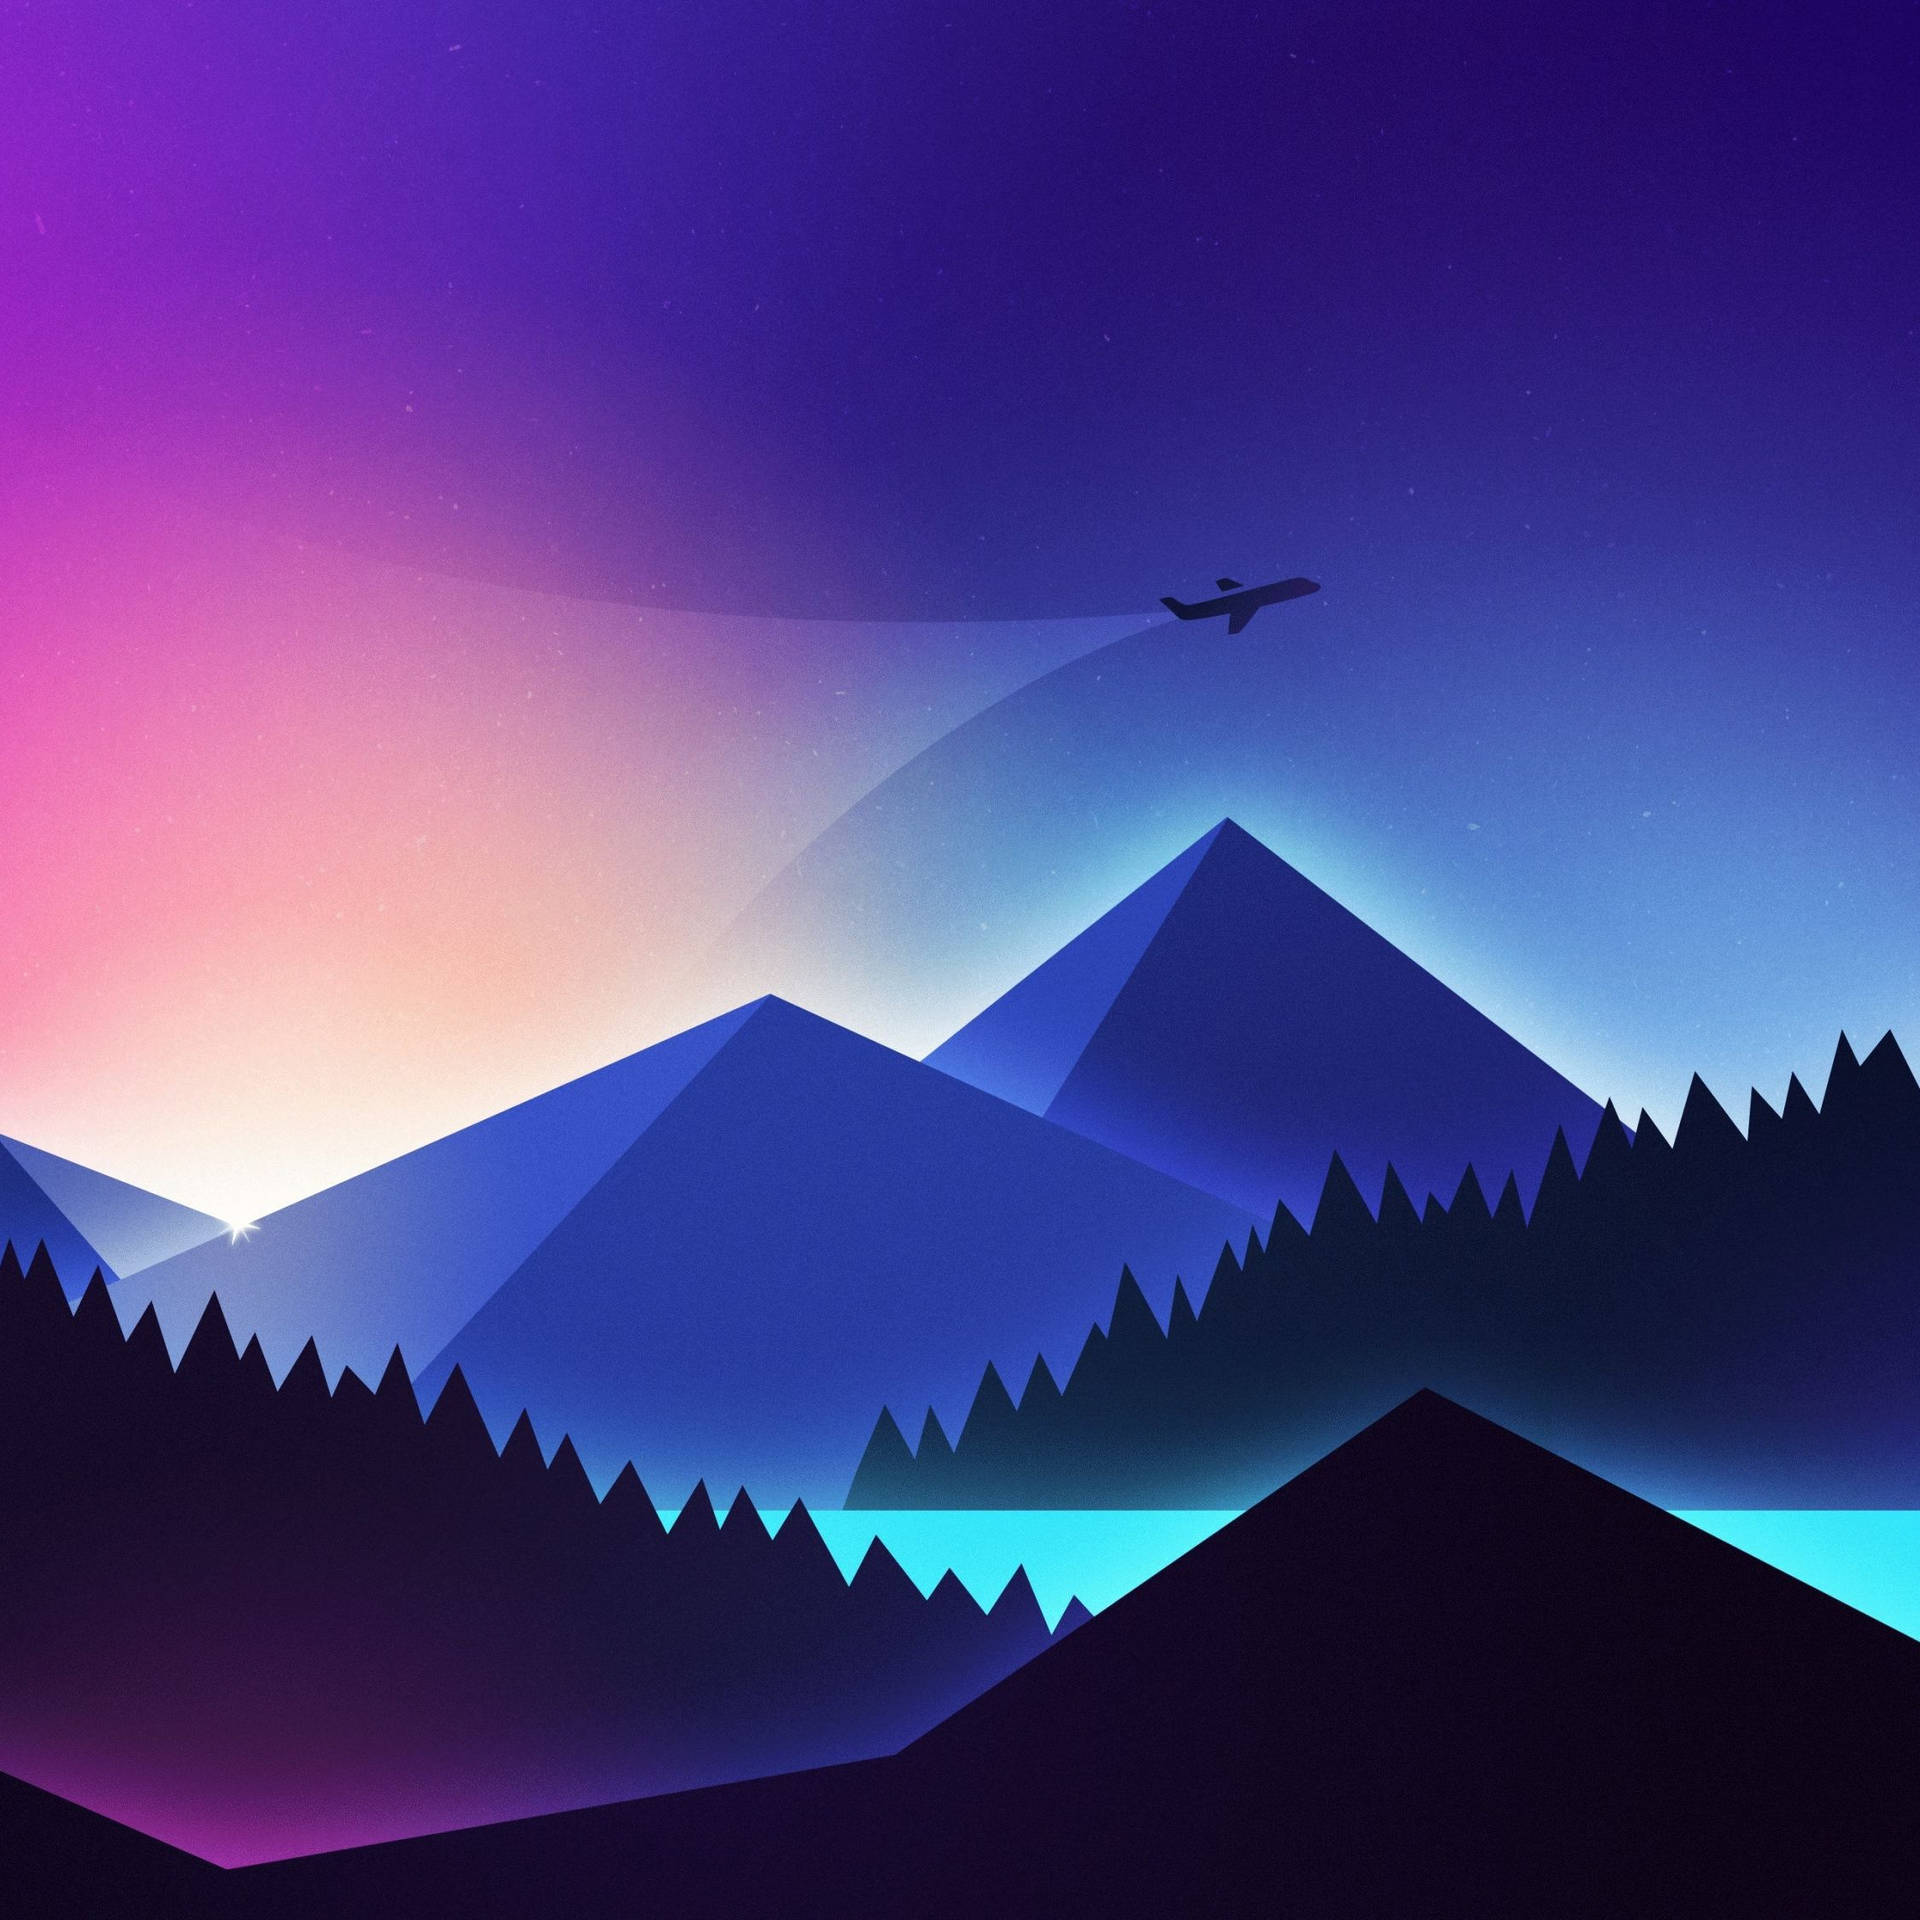 4k Ipad Plane And Mountains Background